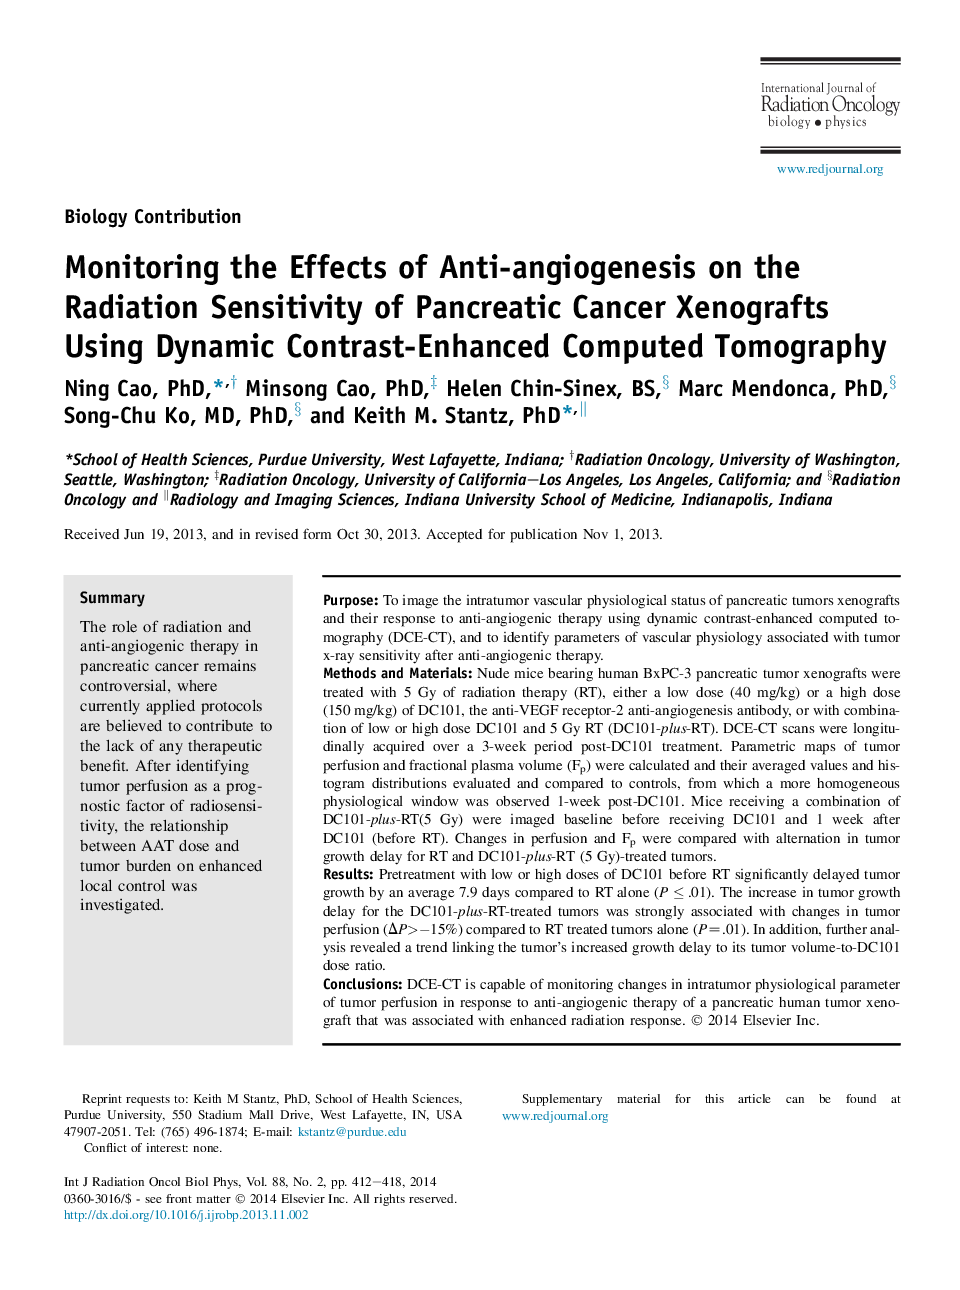 Monitoring the Effects of Anti-angiogenesis on the Radiation Sensitivity of Pancreatic Cancer Xenografts Using Dynamic Contrast-Enhanced Computed Tomography